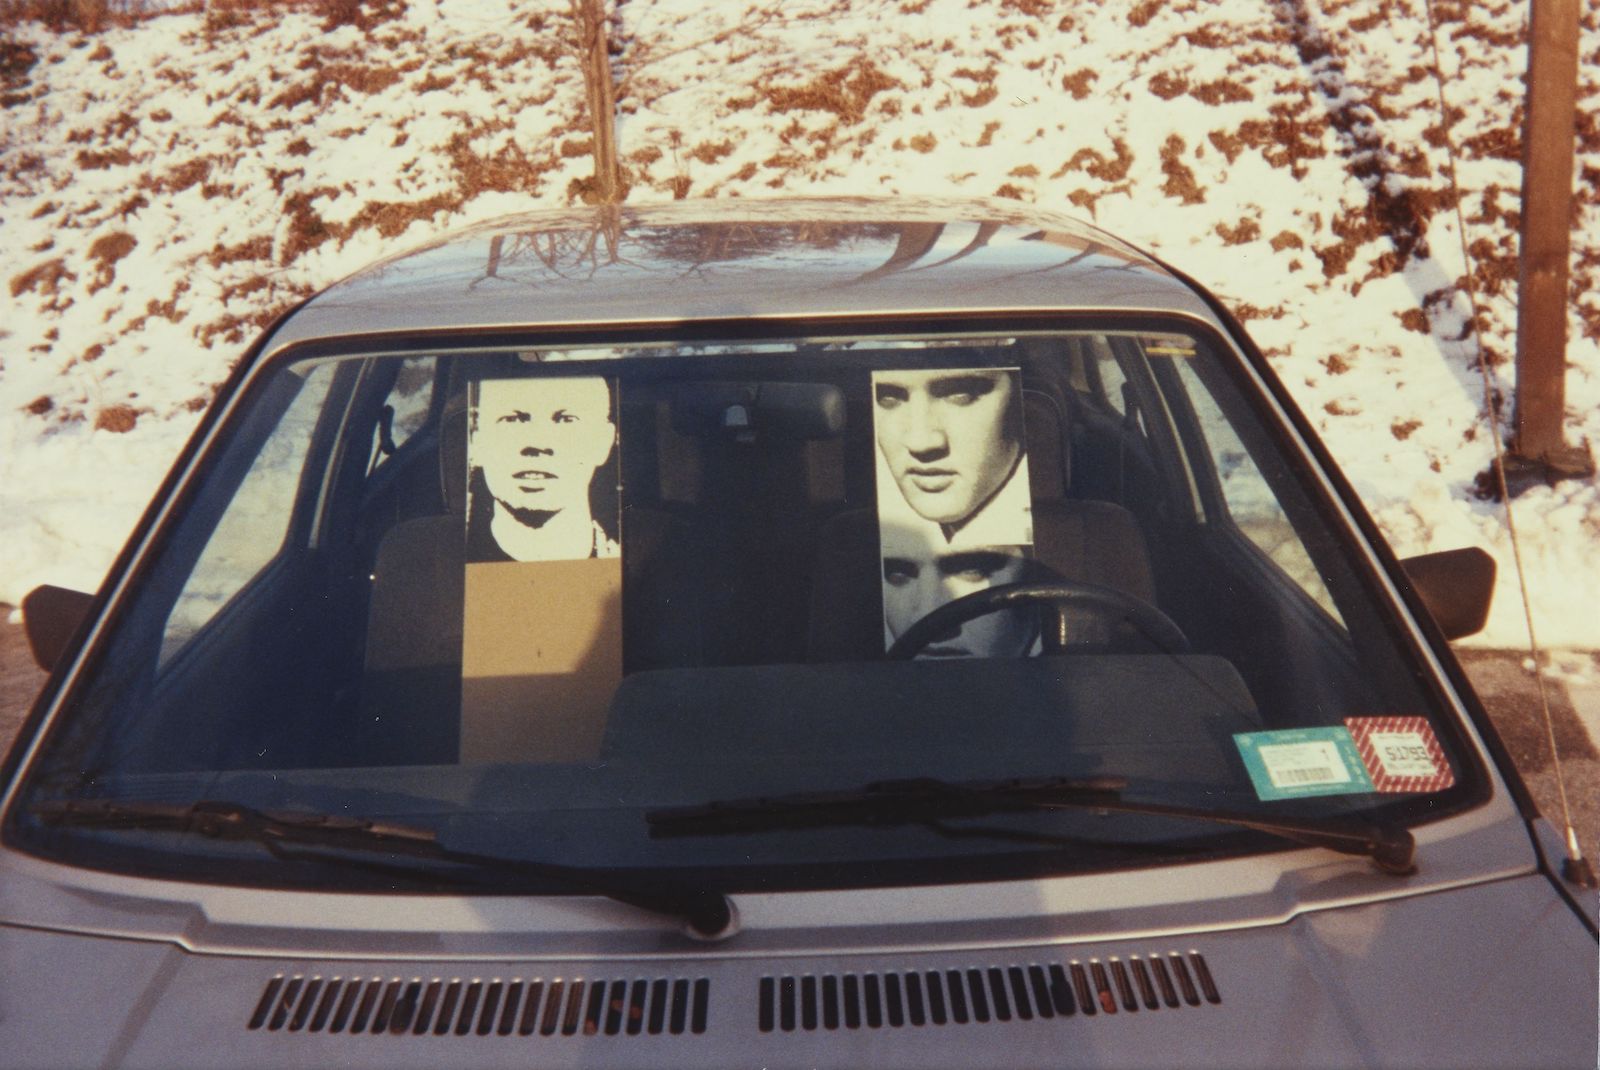 A parked car inhabited by three cut-out photographs, one of the artist and two of Elvis